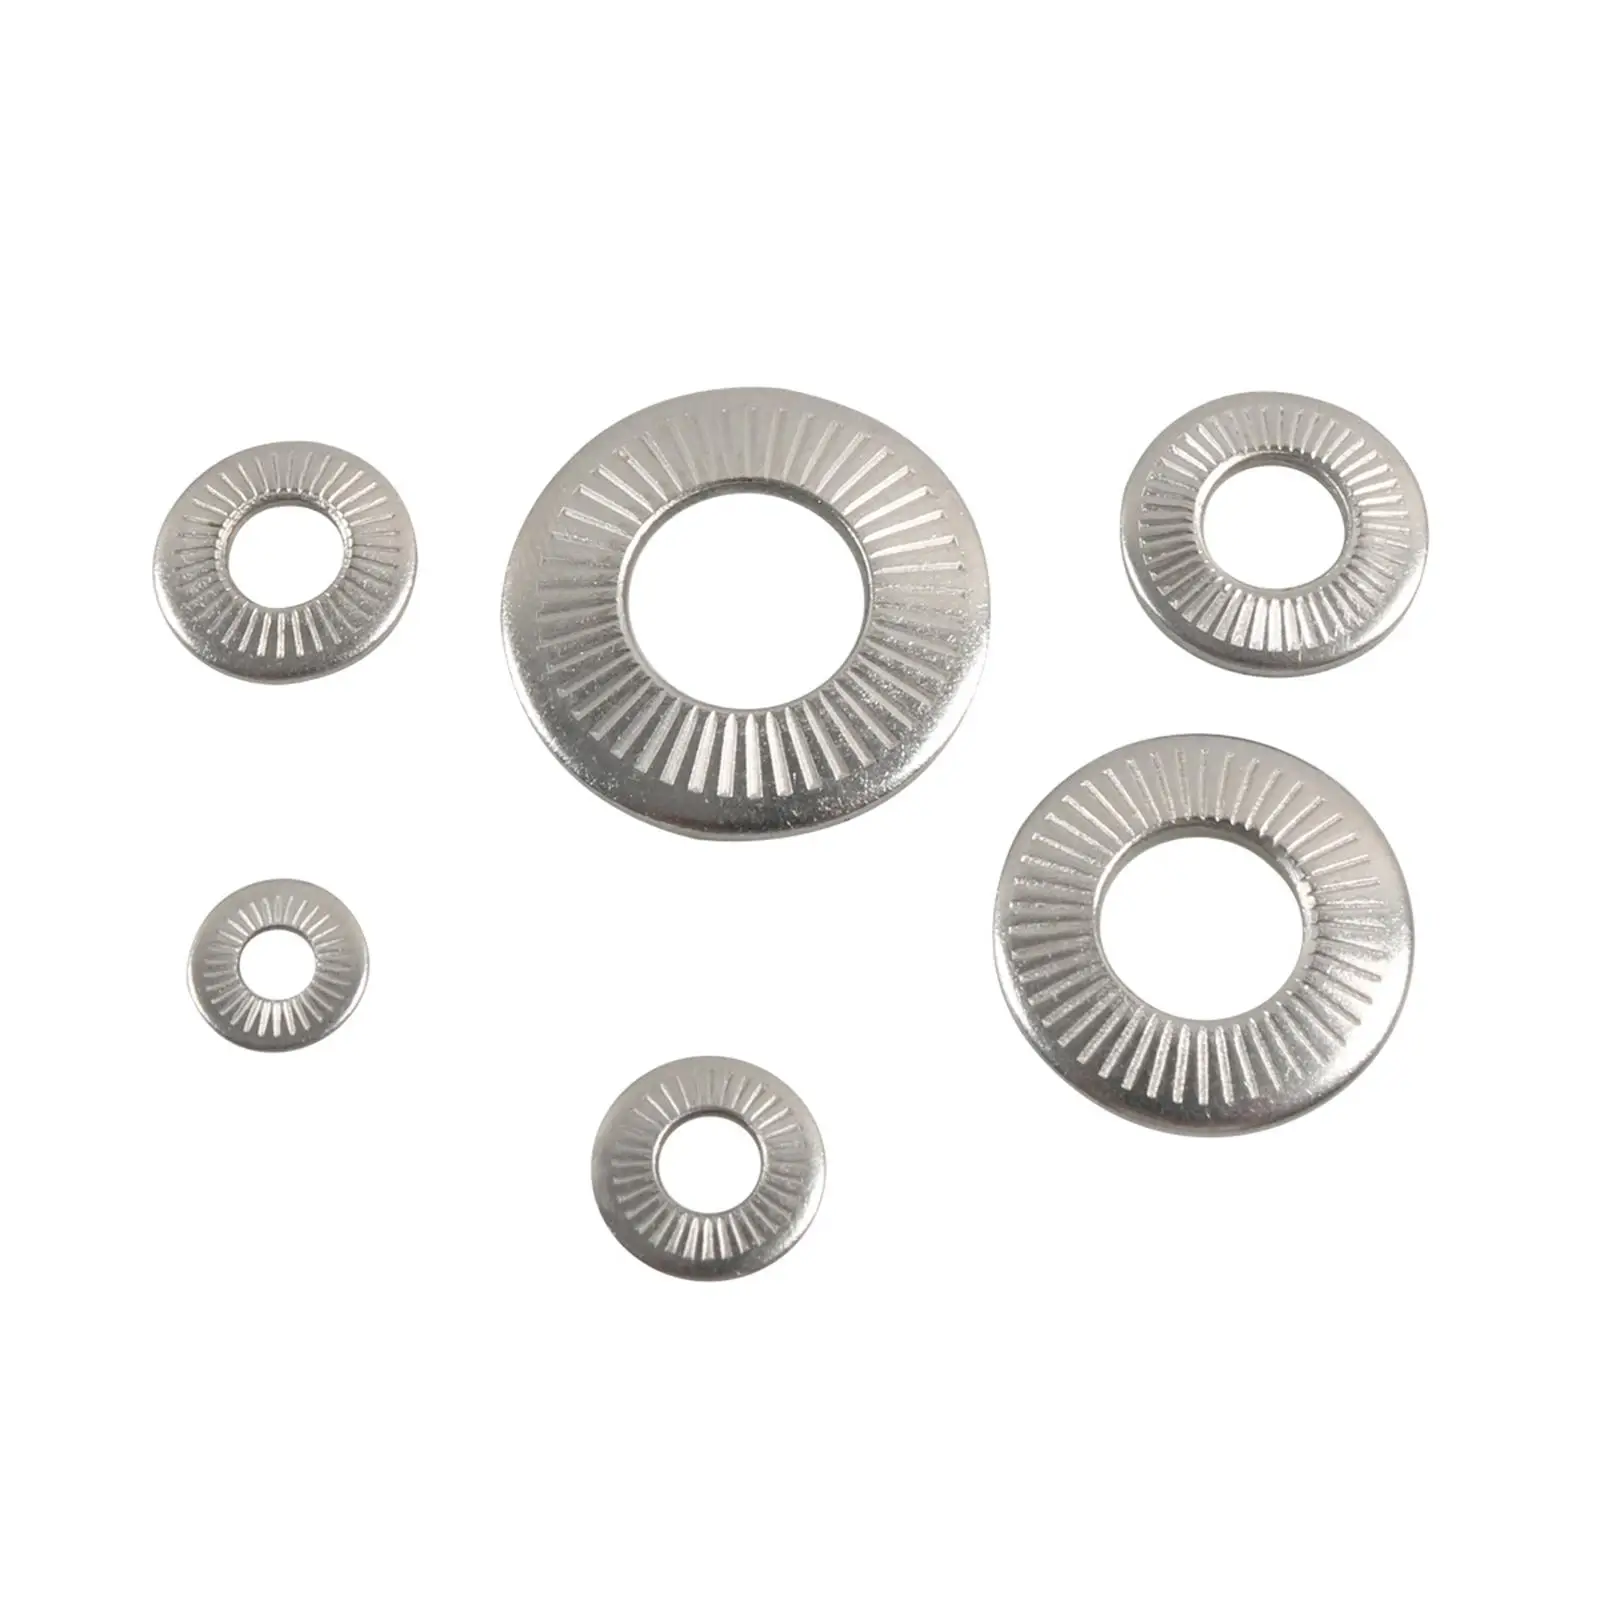 160Pcs M3 M4 M5 M6 M8 M10 Assortment Kit Hardware Disc Spring Serrated Lock Washer Serrated Conical Spring Washer for Automotive